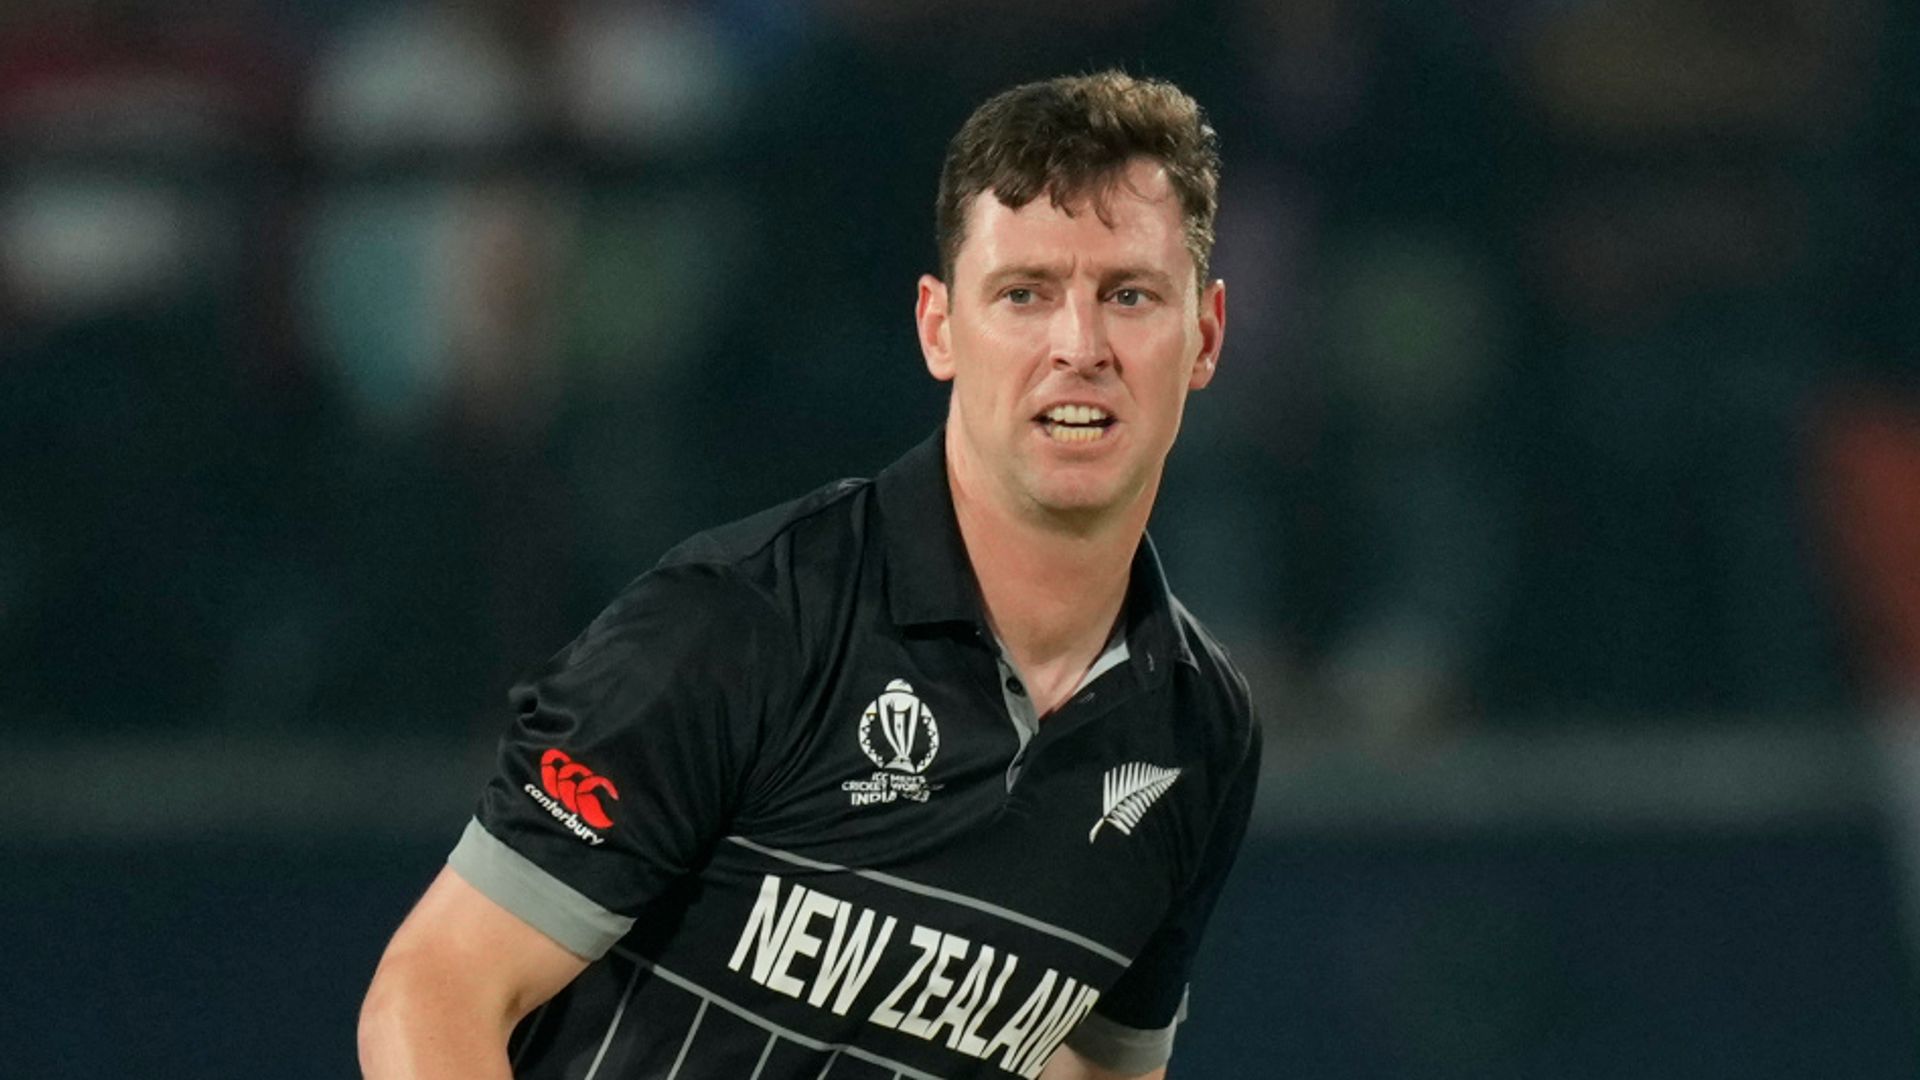 New Zealand's Henry ruled out of World Cup due to injury